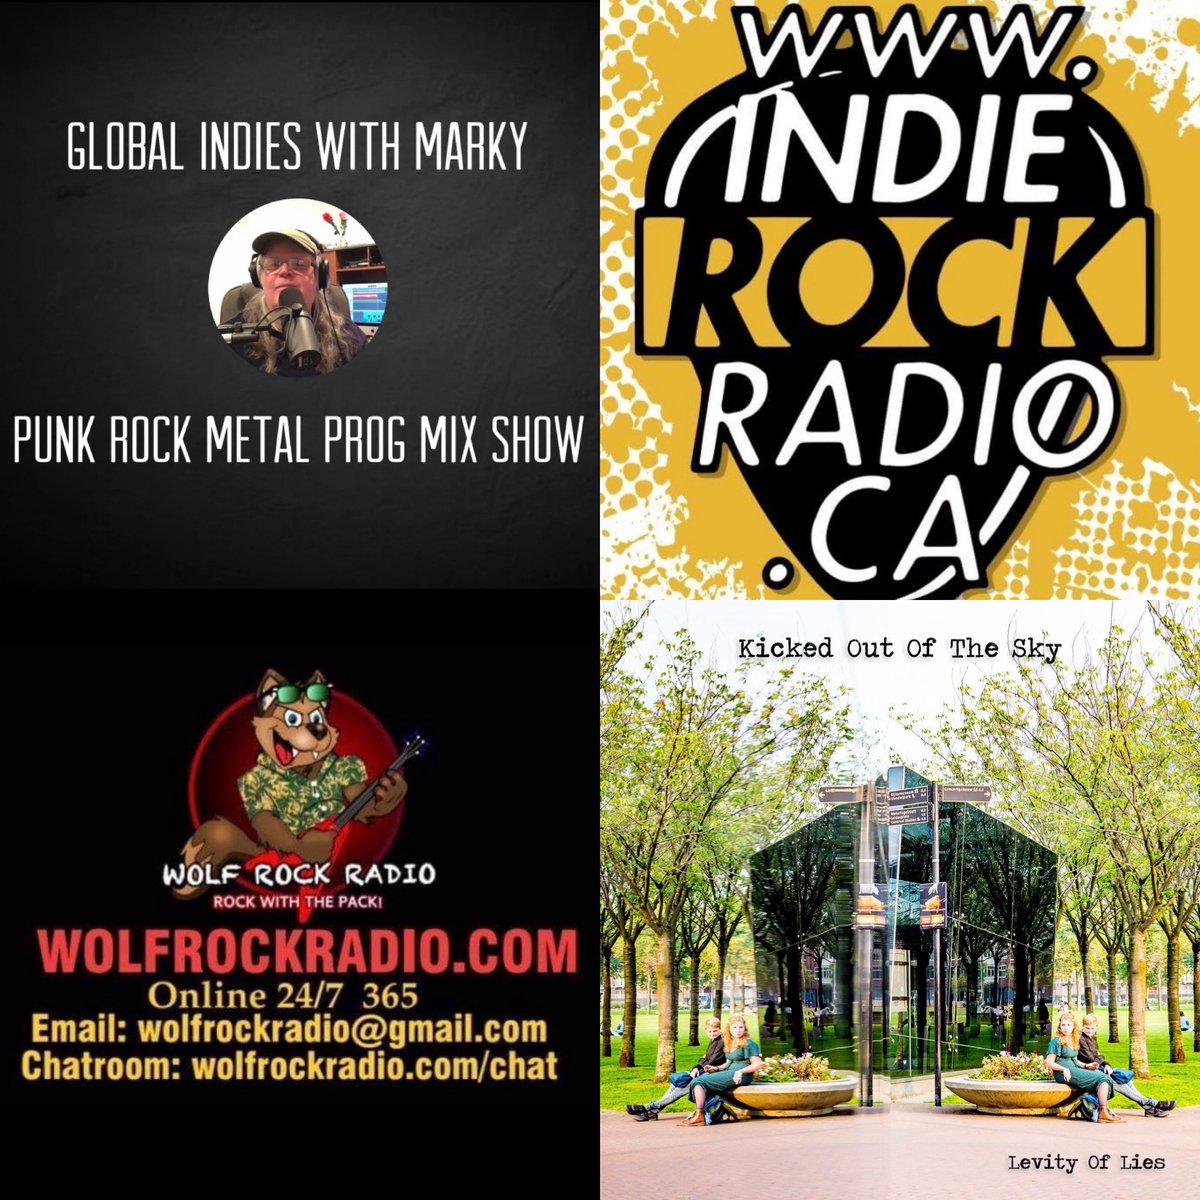 Tune in Thur. 05.30.24 for Global Indies With Marky on Indie rock radio 2 & WOLF ROCK RADIO. Thank you @IndiesWithMarky for your support!! X WOLF ROCK RADIO wolfrockradio.com 7PM EST 6PM CST Indie rock radio 2 indierockradio.ca 9PM EST 8PM CST 📸: @letgomedia